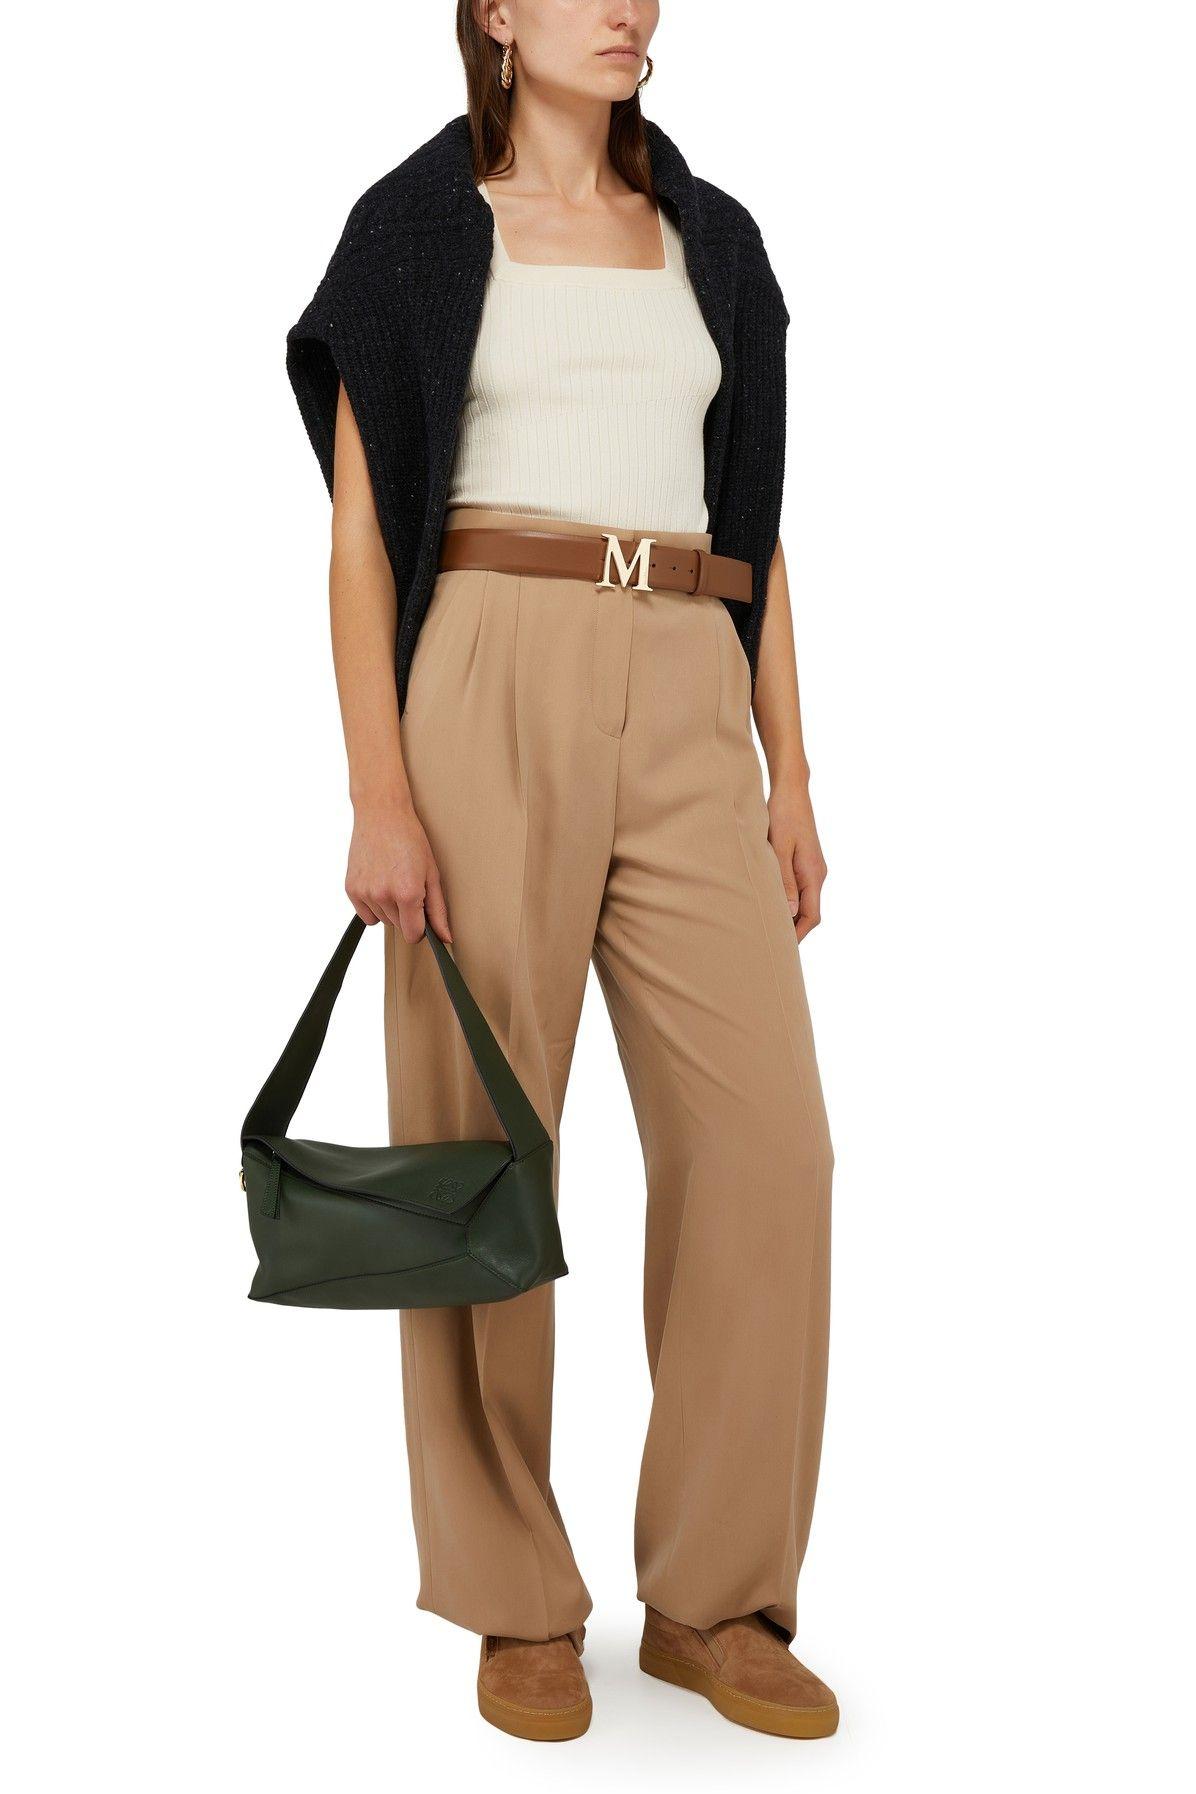 Max Mara Efeso Top - Leisure in Natural | Lyst